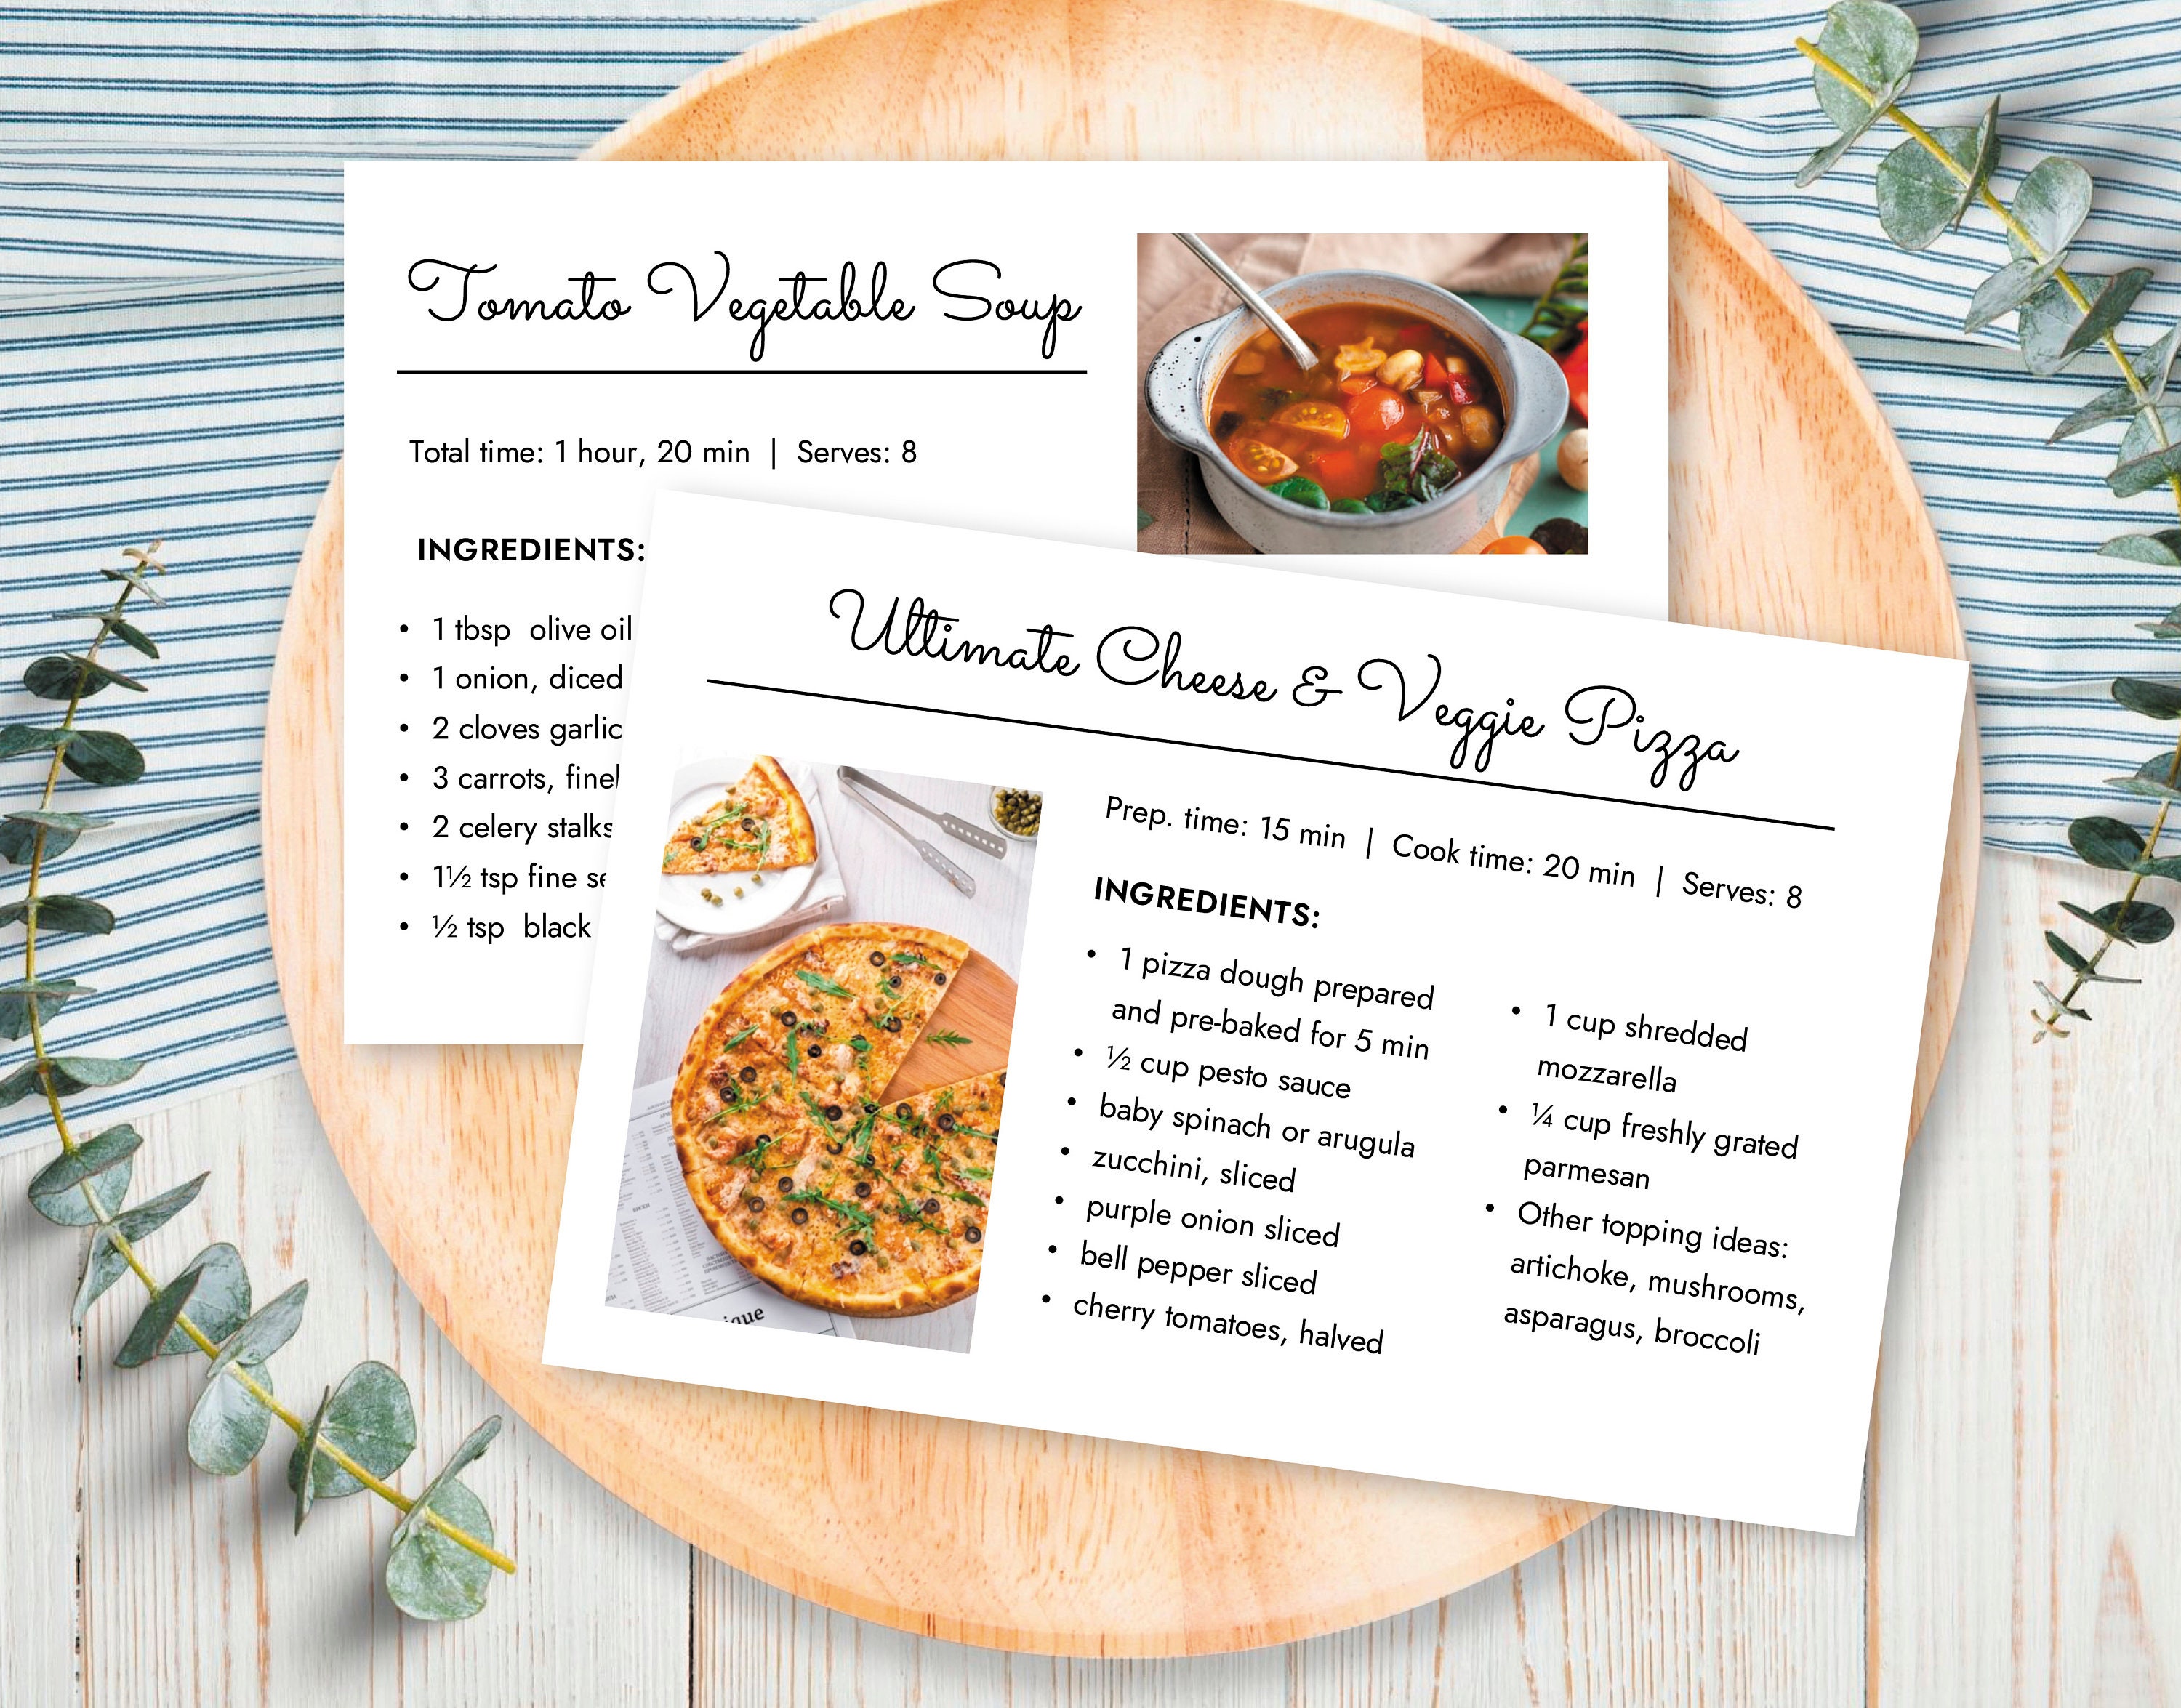 4x6 and 5x7 Recipe Card Template, Recipe Card MS Word Template